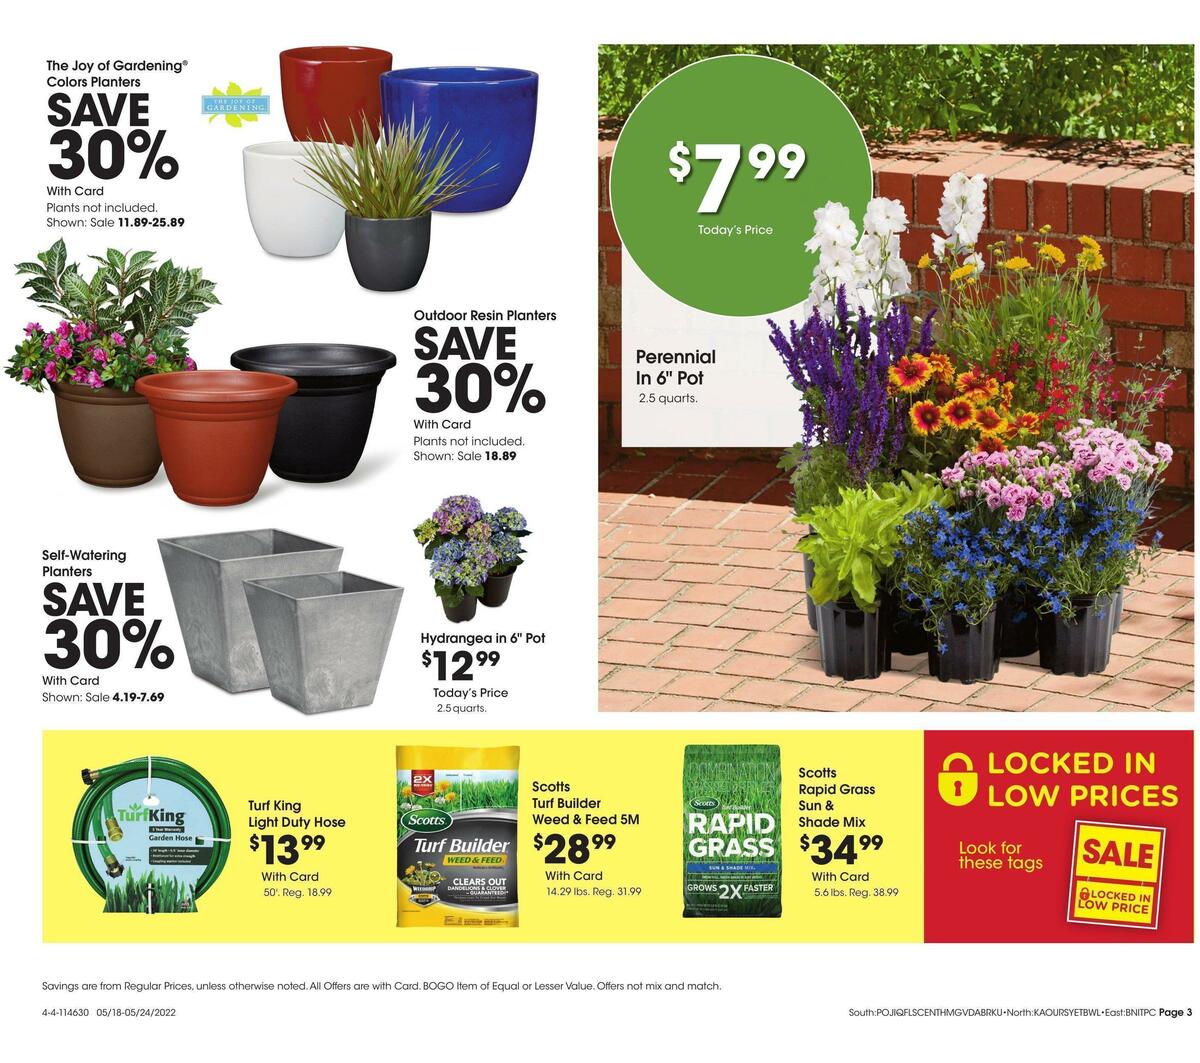 Fred Meyer Garden Weekly Ad from May 18